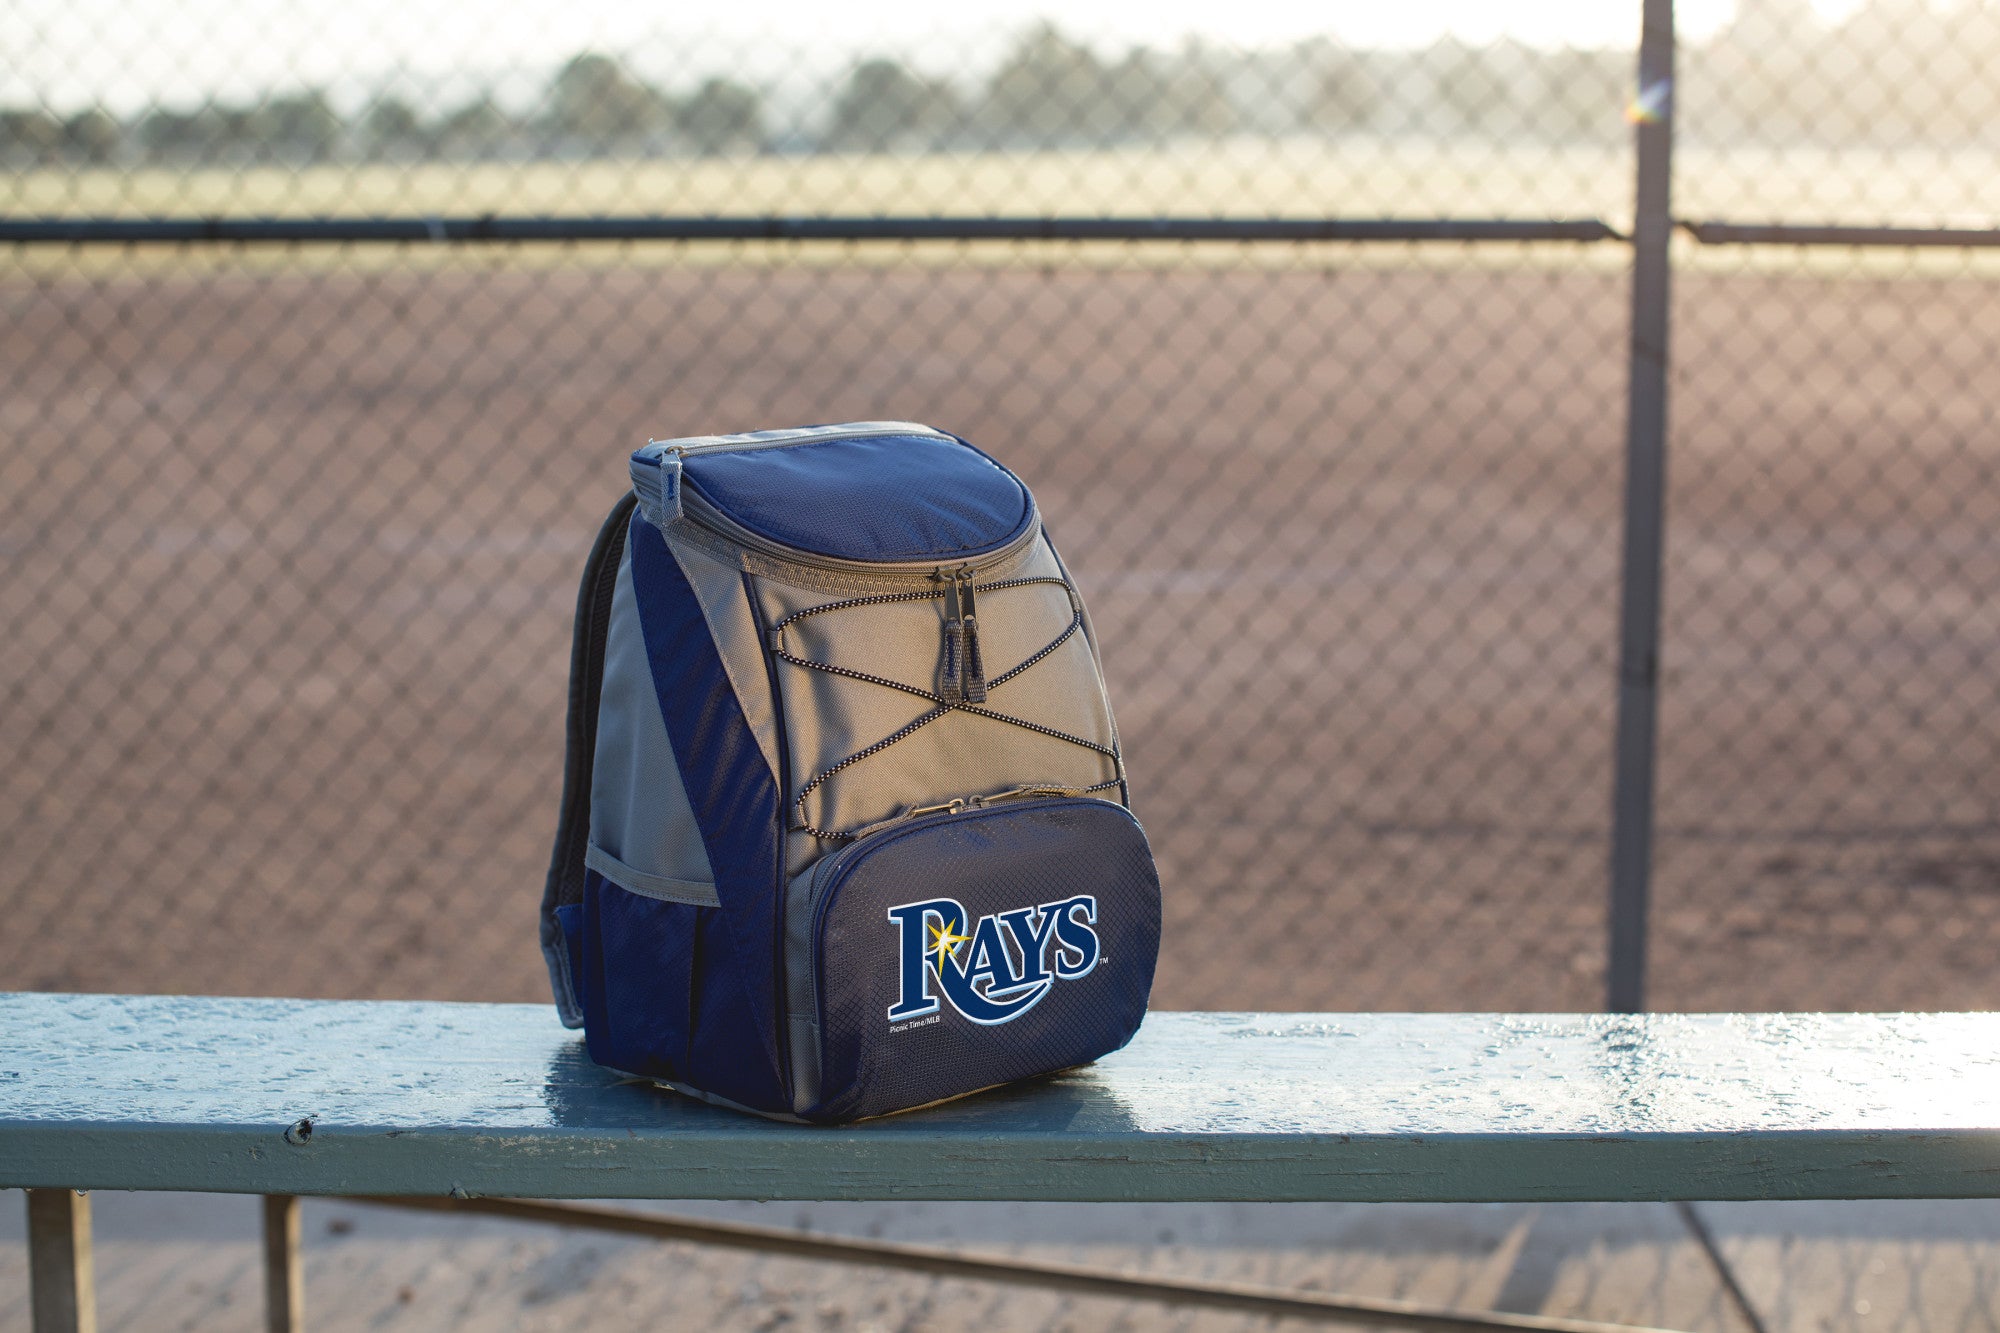 Tampa Bay Rays - PTX Backpack Cooler